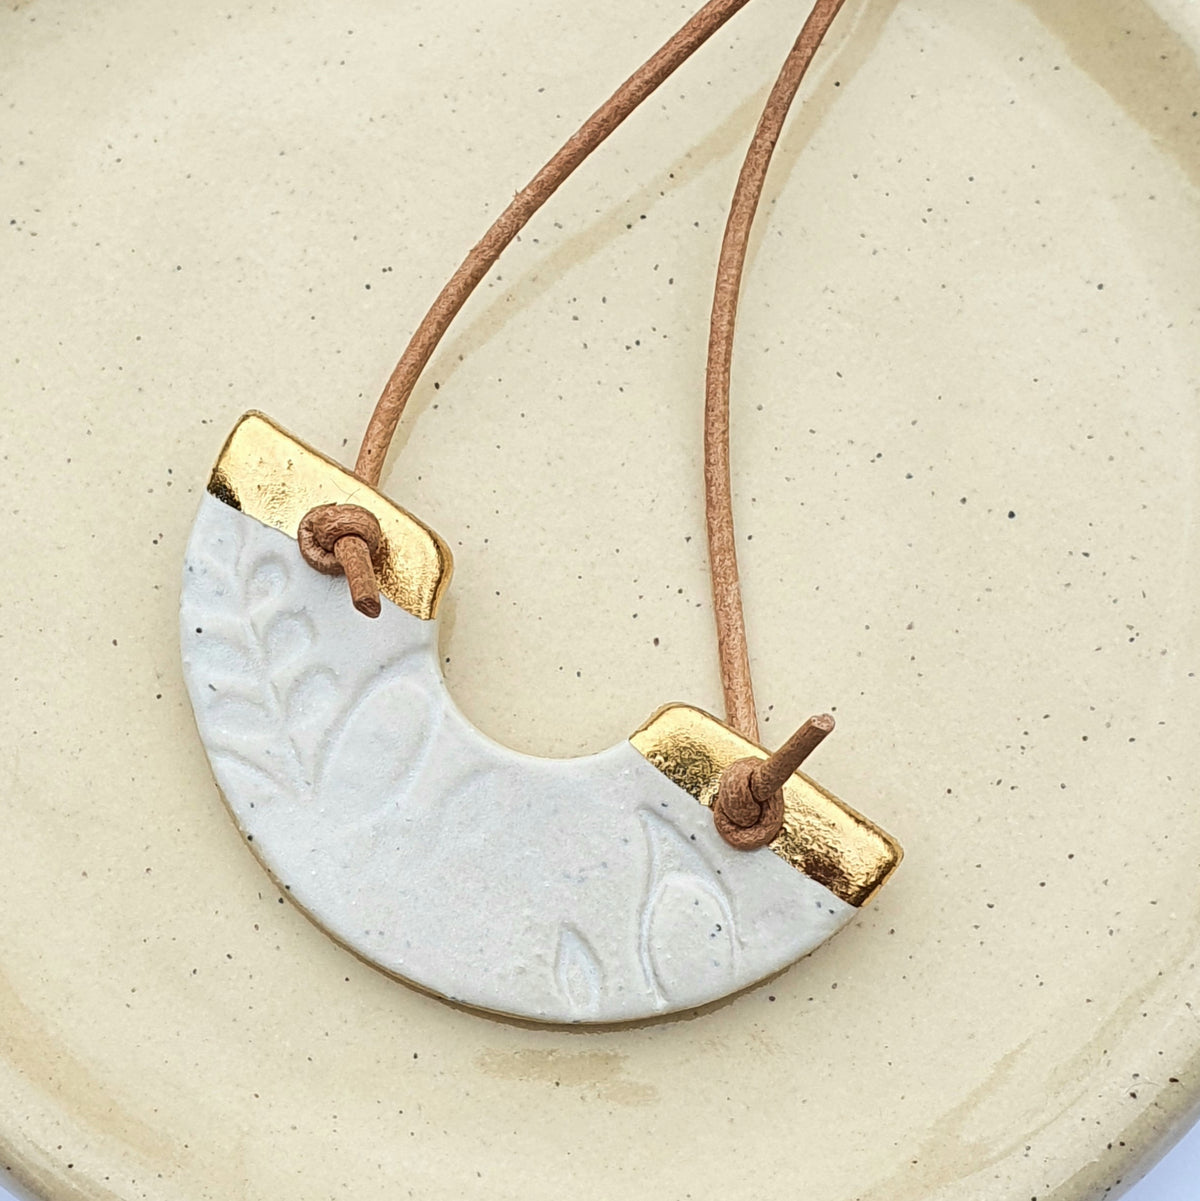 Speckled clay necklace - U shape, white glaze with gold lustre detailing